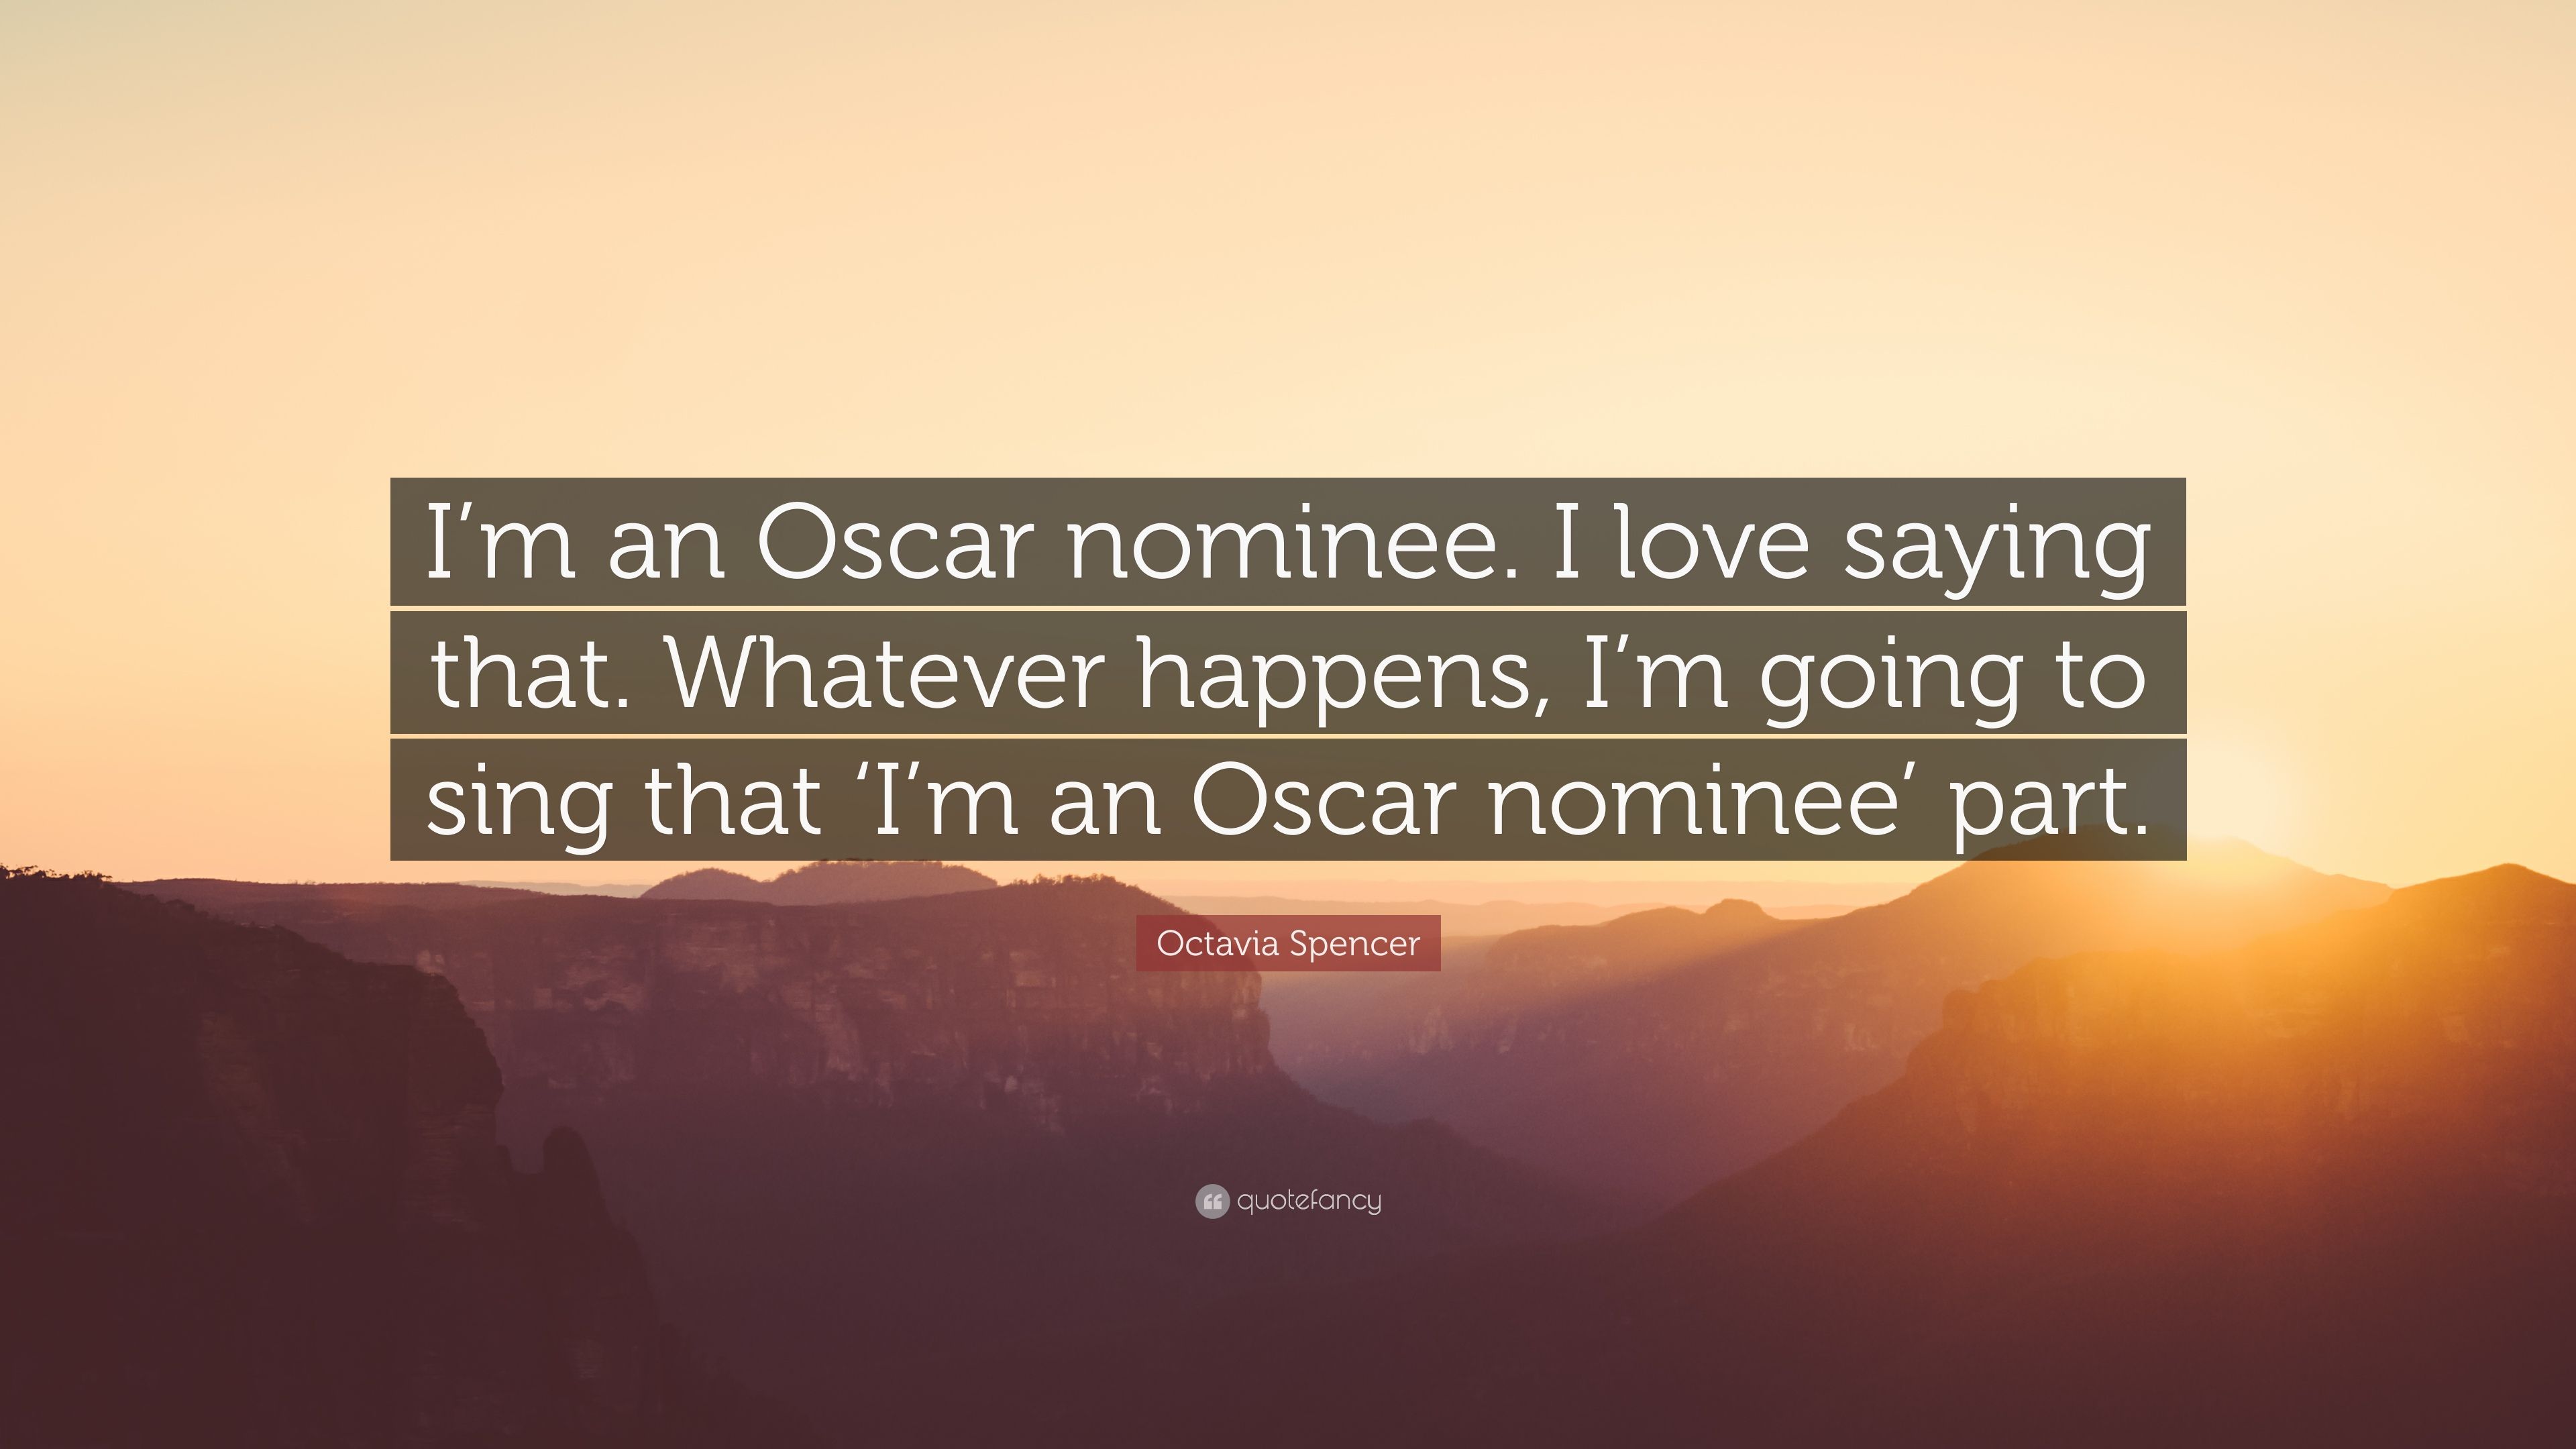 Octavia Spencer Quote: “I'm an Oscar nominee. I love saying that